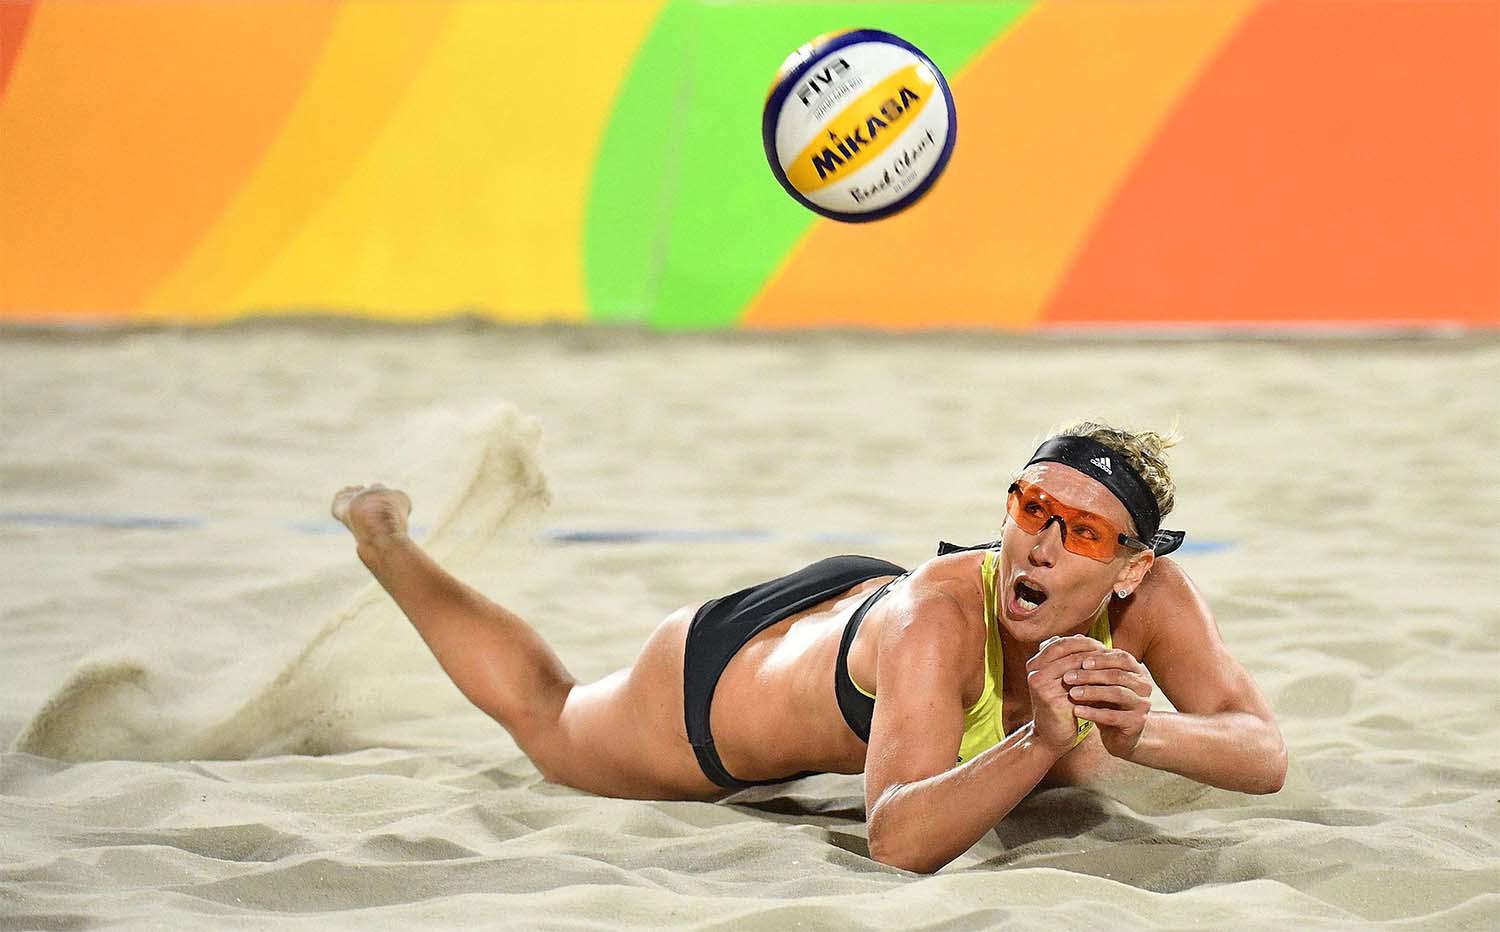 Beach volleyball players cleared to wear bikinis in Qatar event